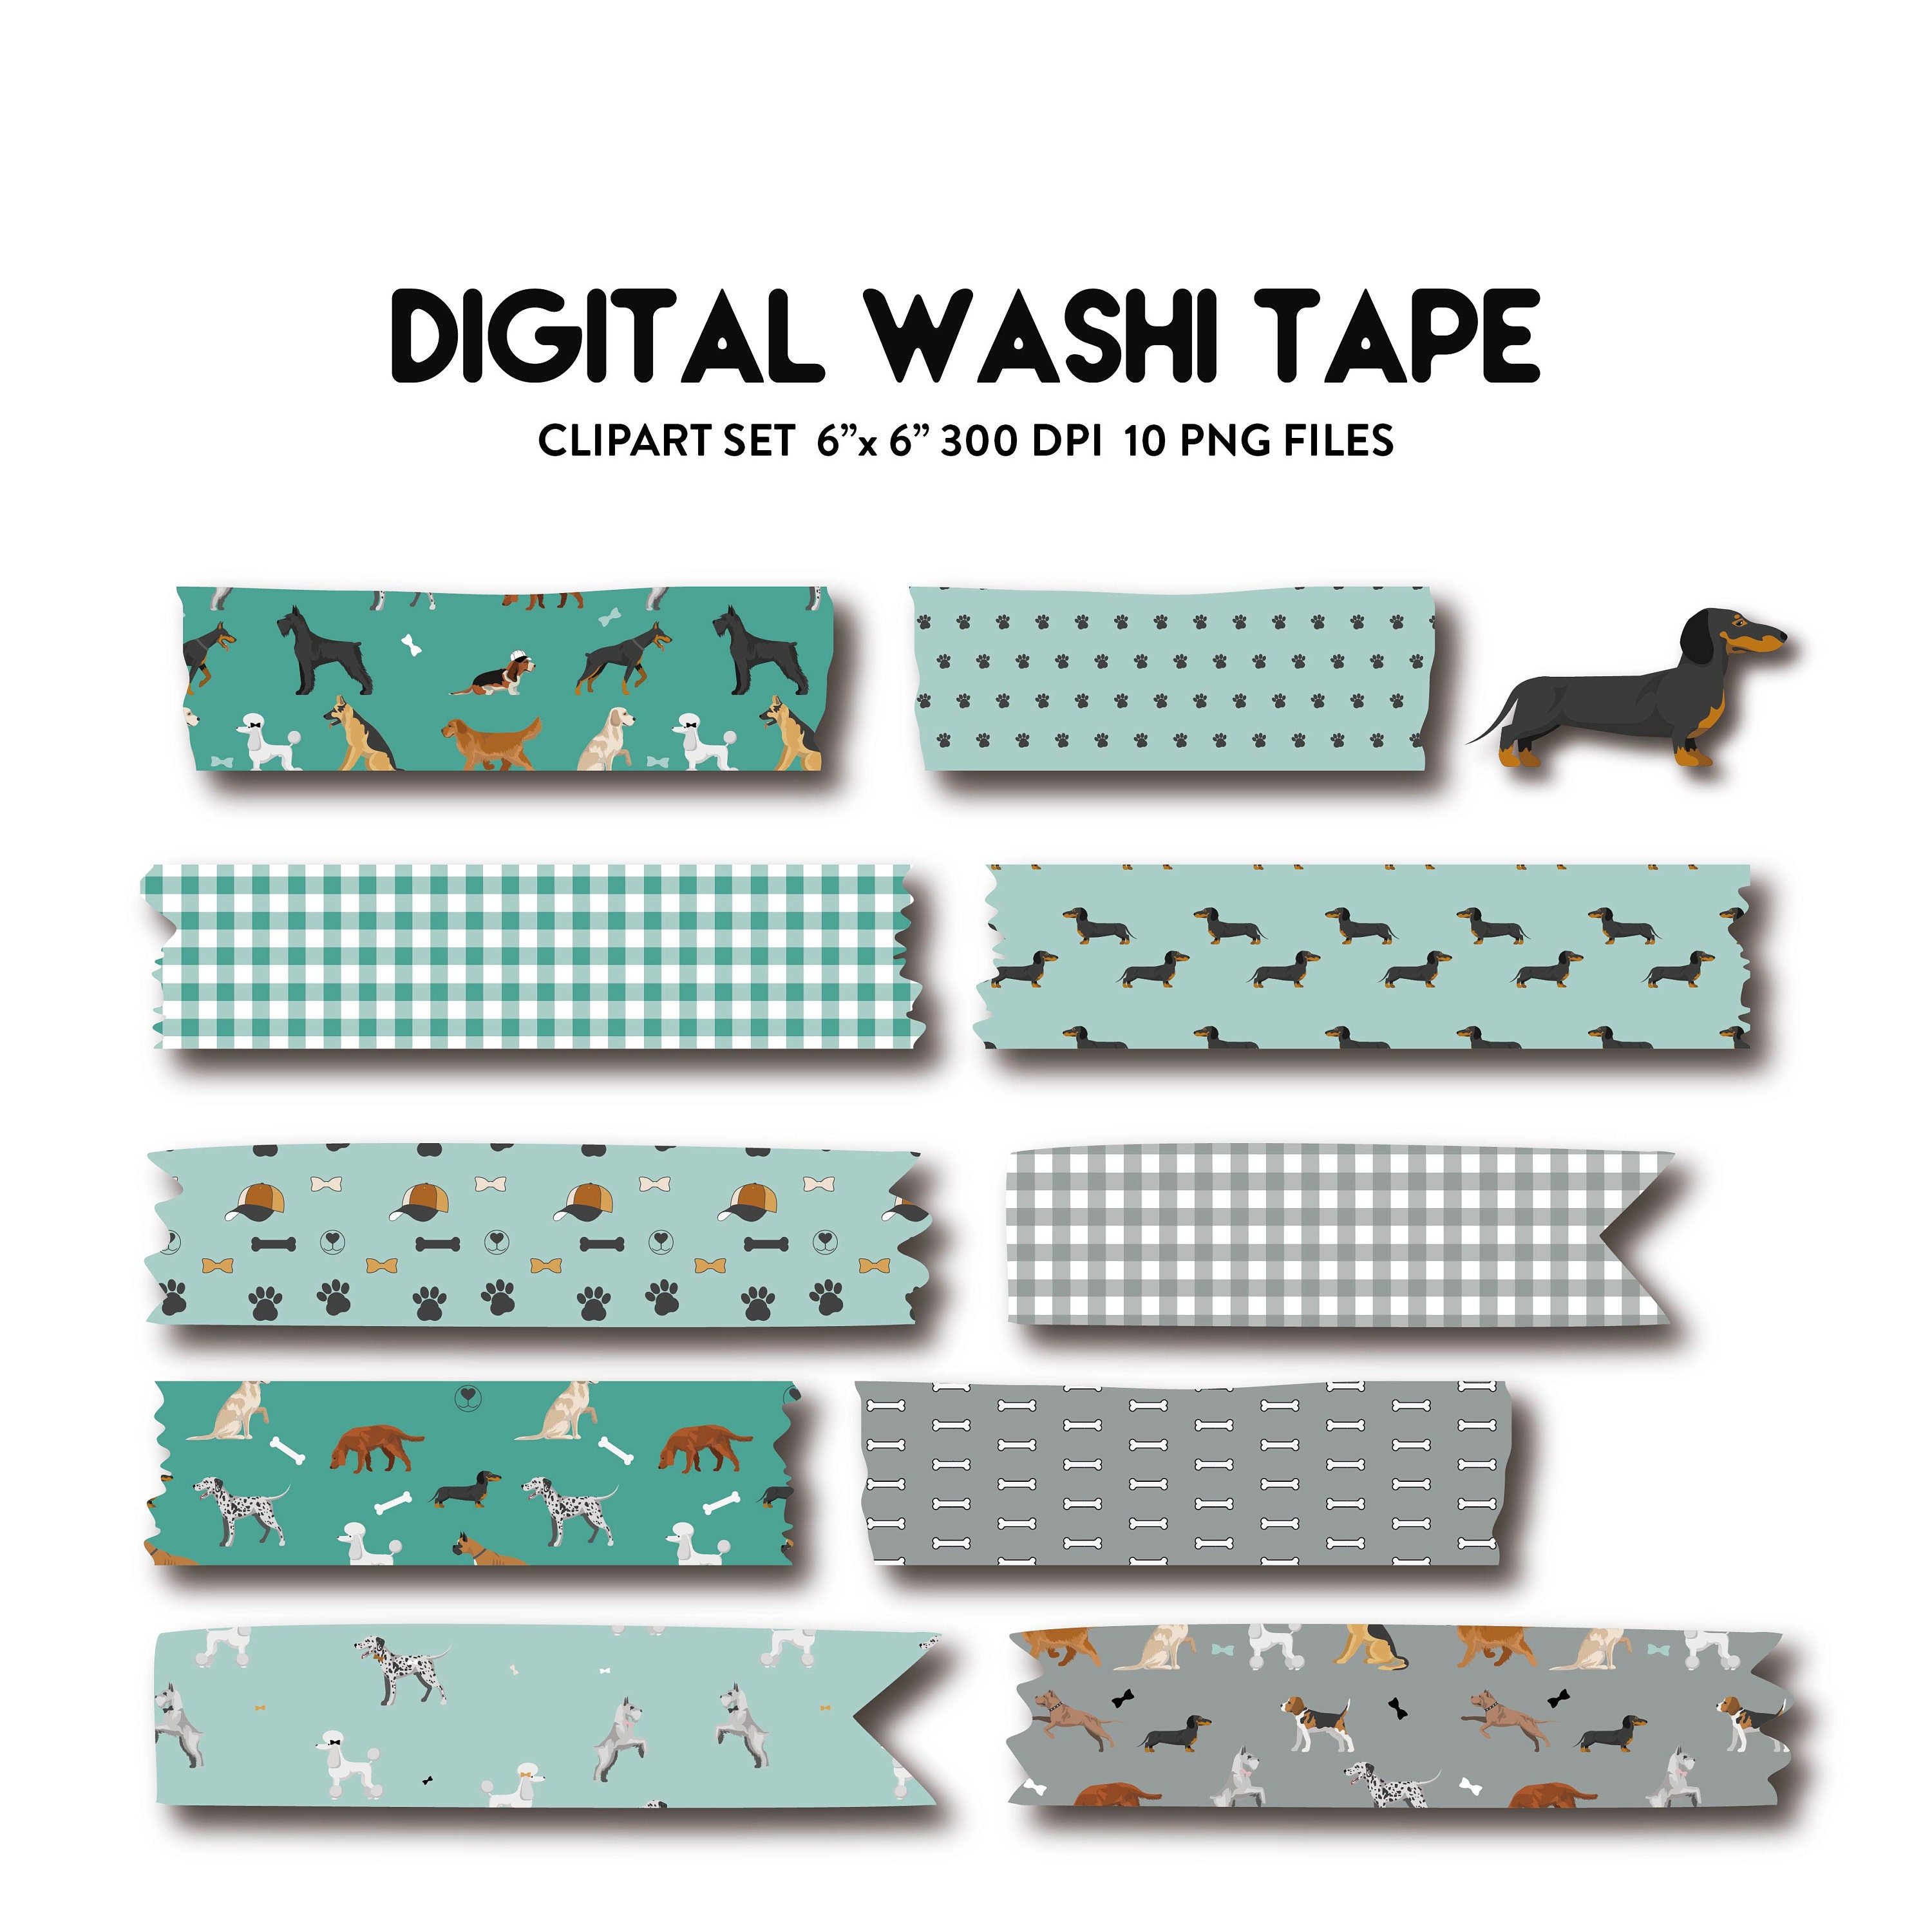 Washi Tape Clipart: Green Washi Tape Clipart Digital Washi Tape Clipart  Scrapbooking, Digital Scrapbook Kit, Scrapbook Elements, Tags